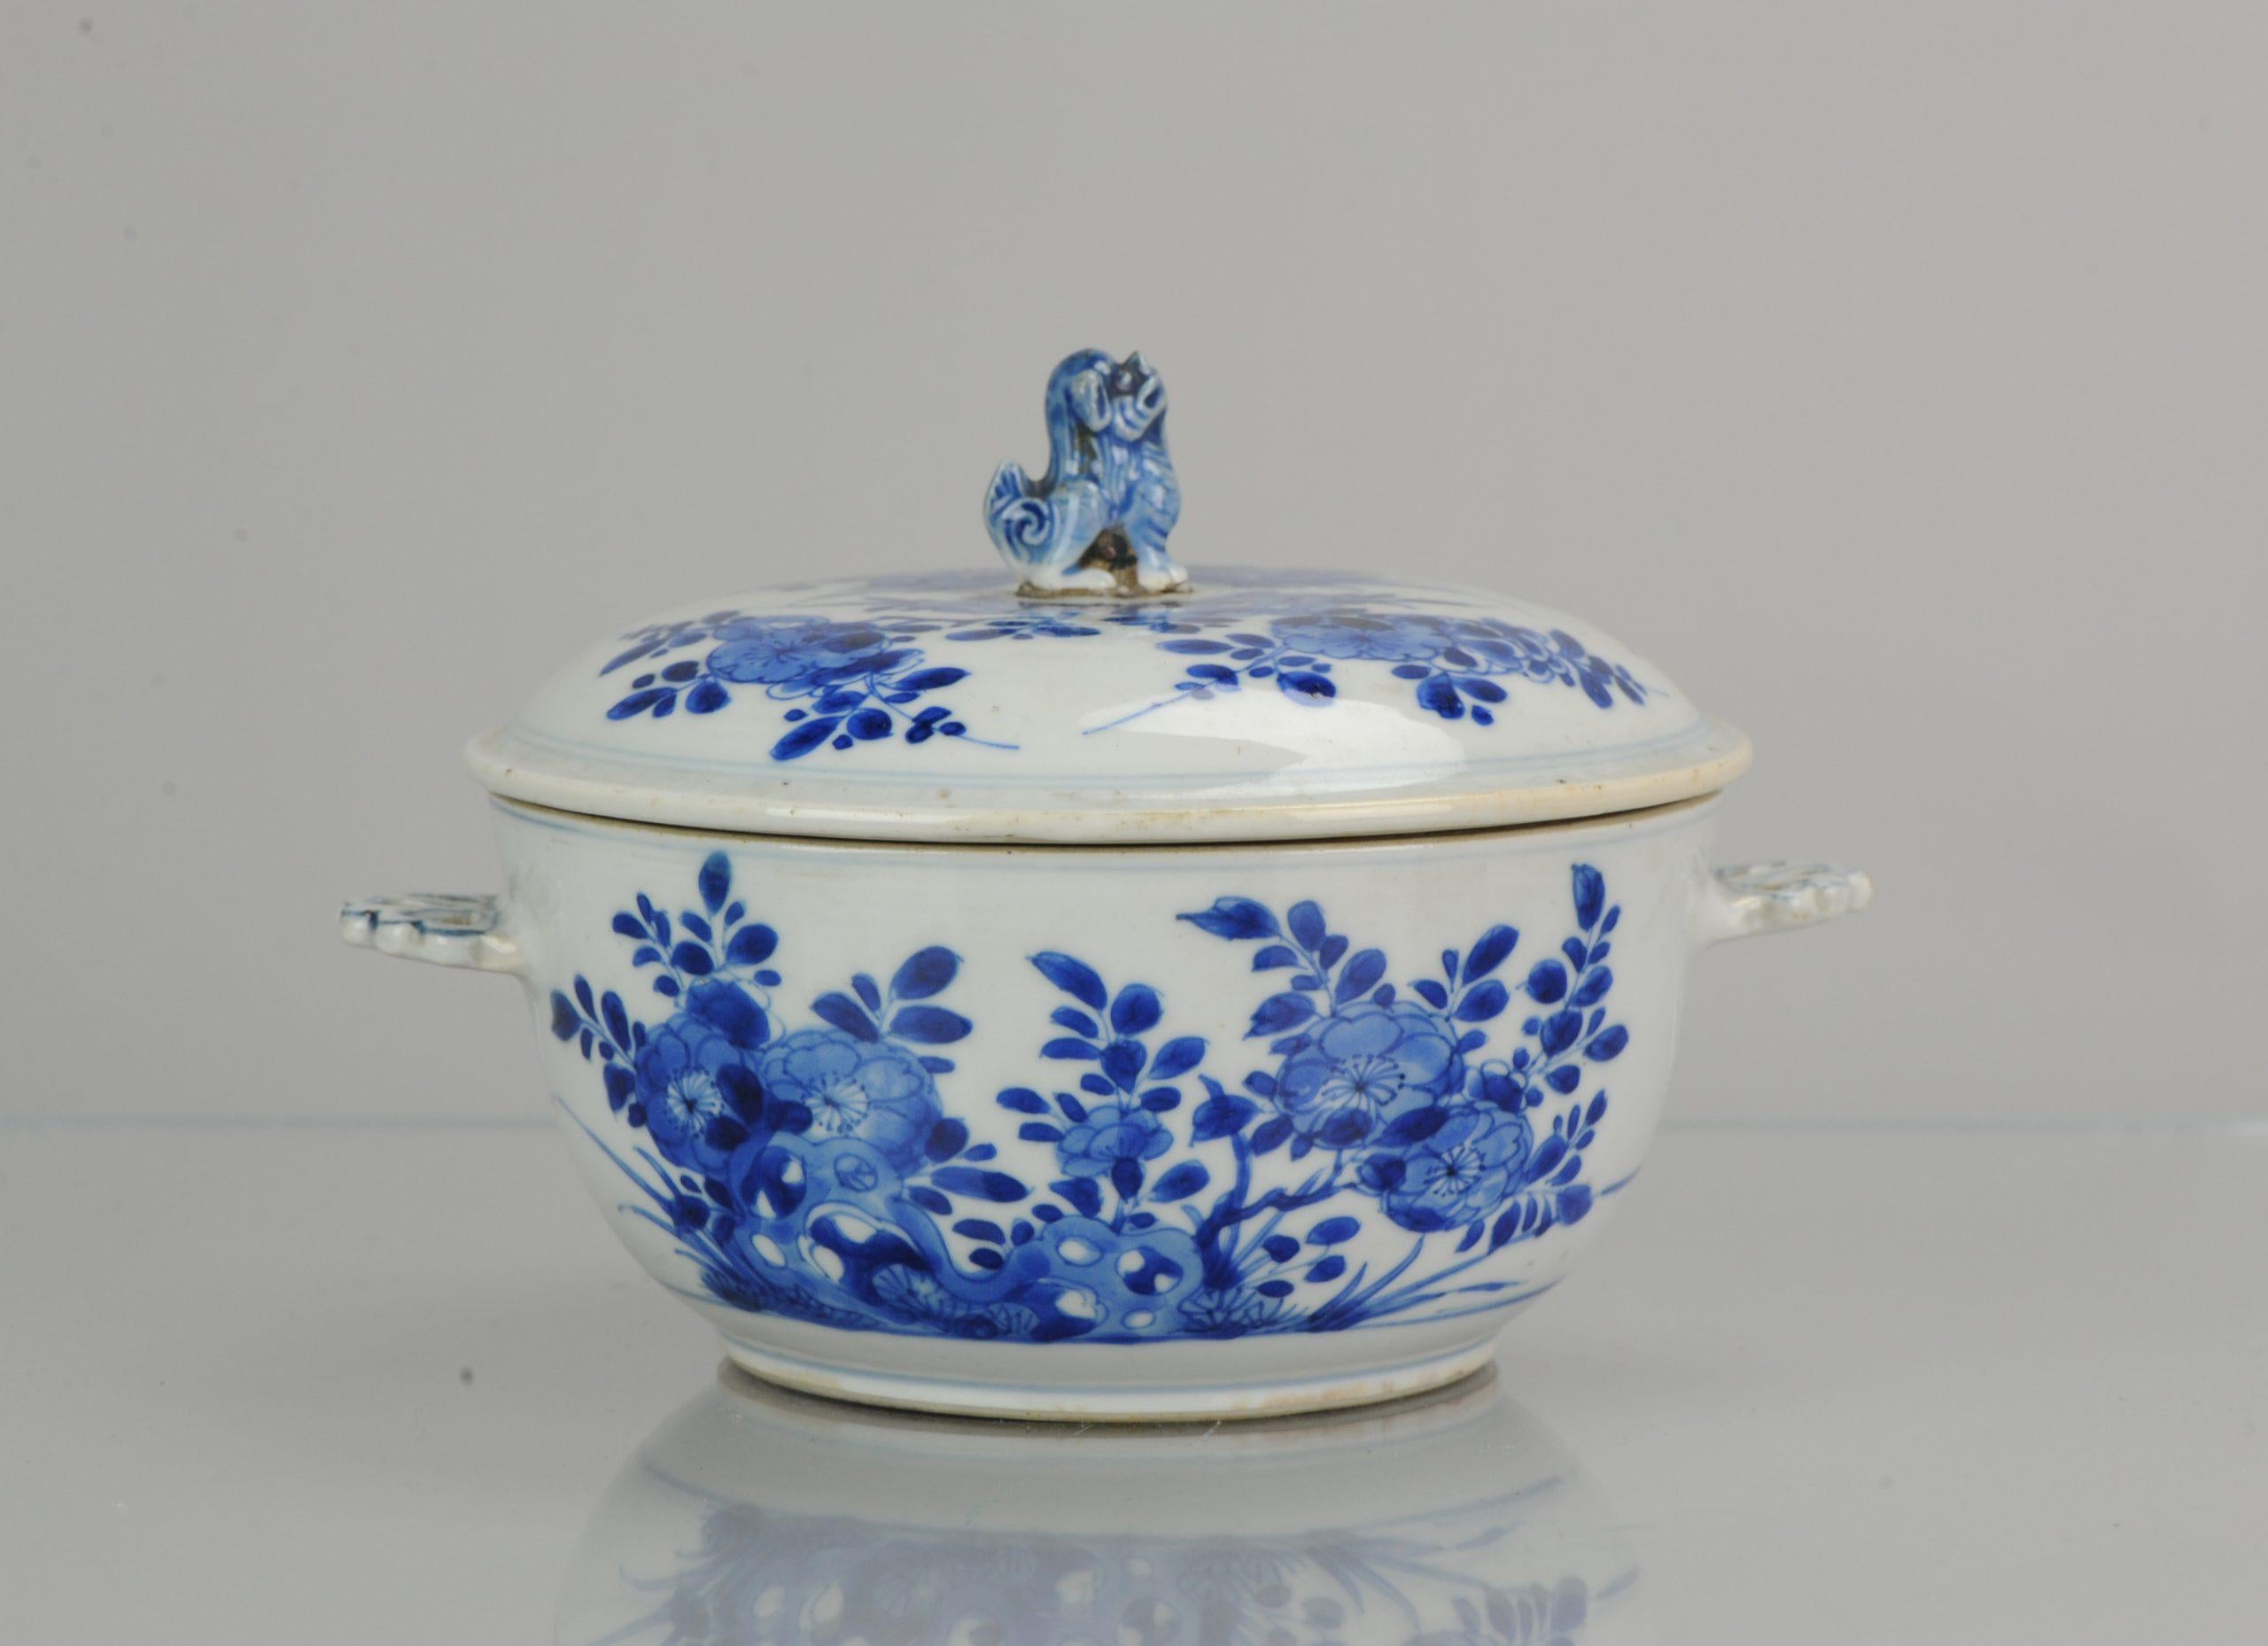 A very nicely made tureen of trademark kangxi blue and white decoration.

Provenance: Ex. Bluett & Sons

A trademark example of Kangxi blue and white. Decorated with bajixiang
Condition
Overall condition lion reattached with metal, nicely